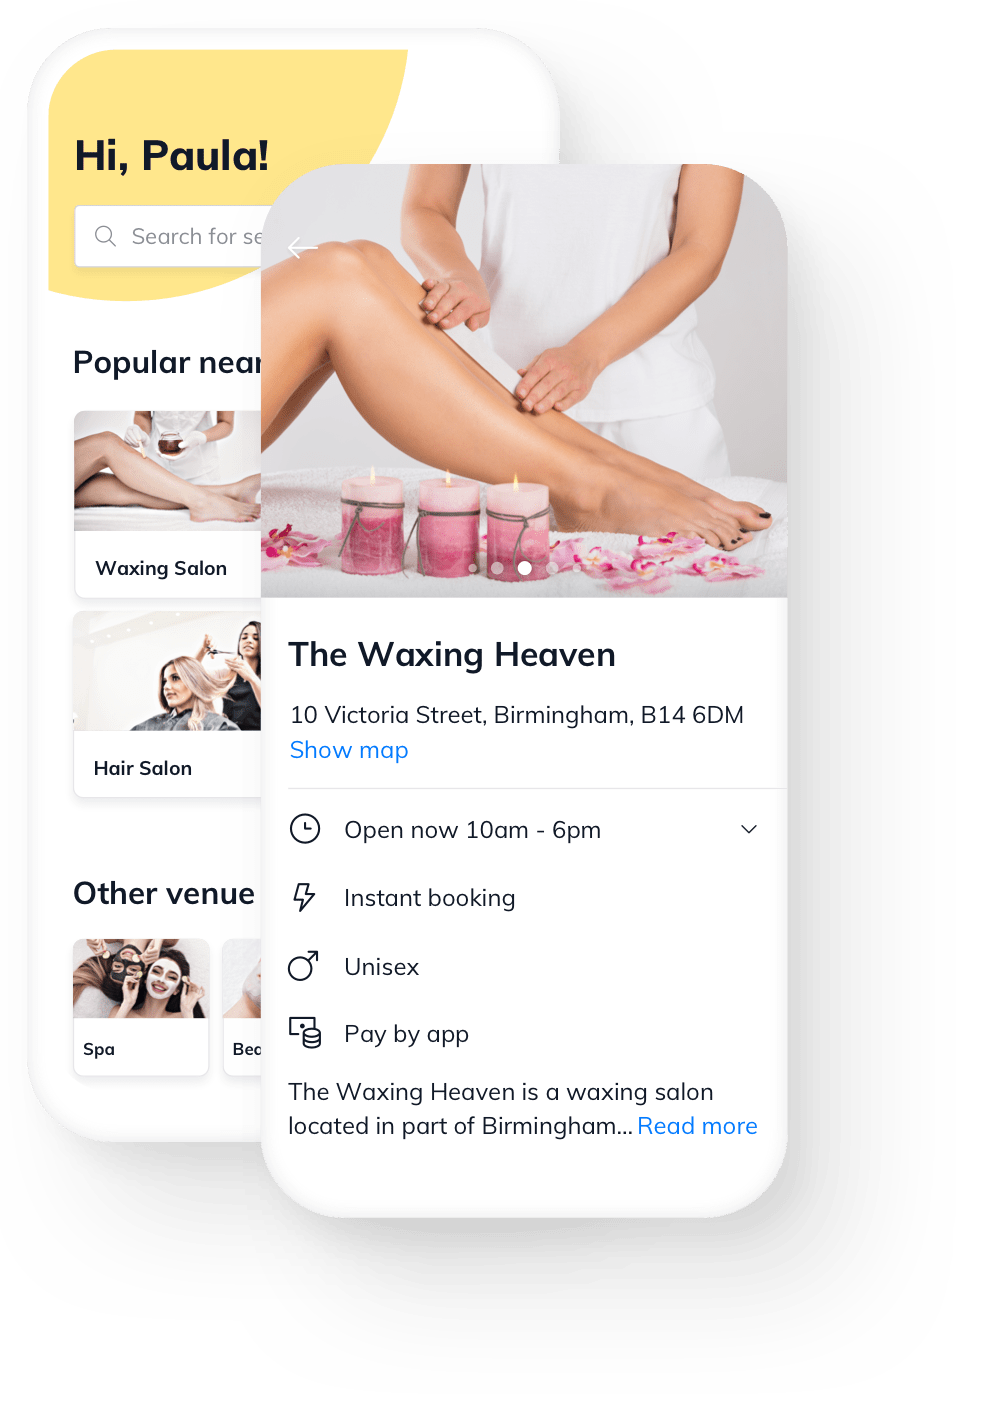 Fresha is the top-rated salon software allowing you to enhance your salon's online presence with powerful marketing and promotional tools, designed to attract new clients and strengthen relationships with existing customers.